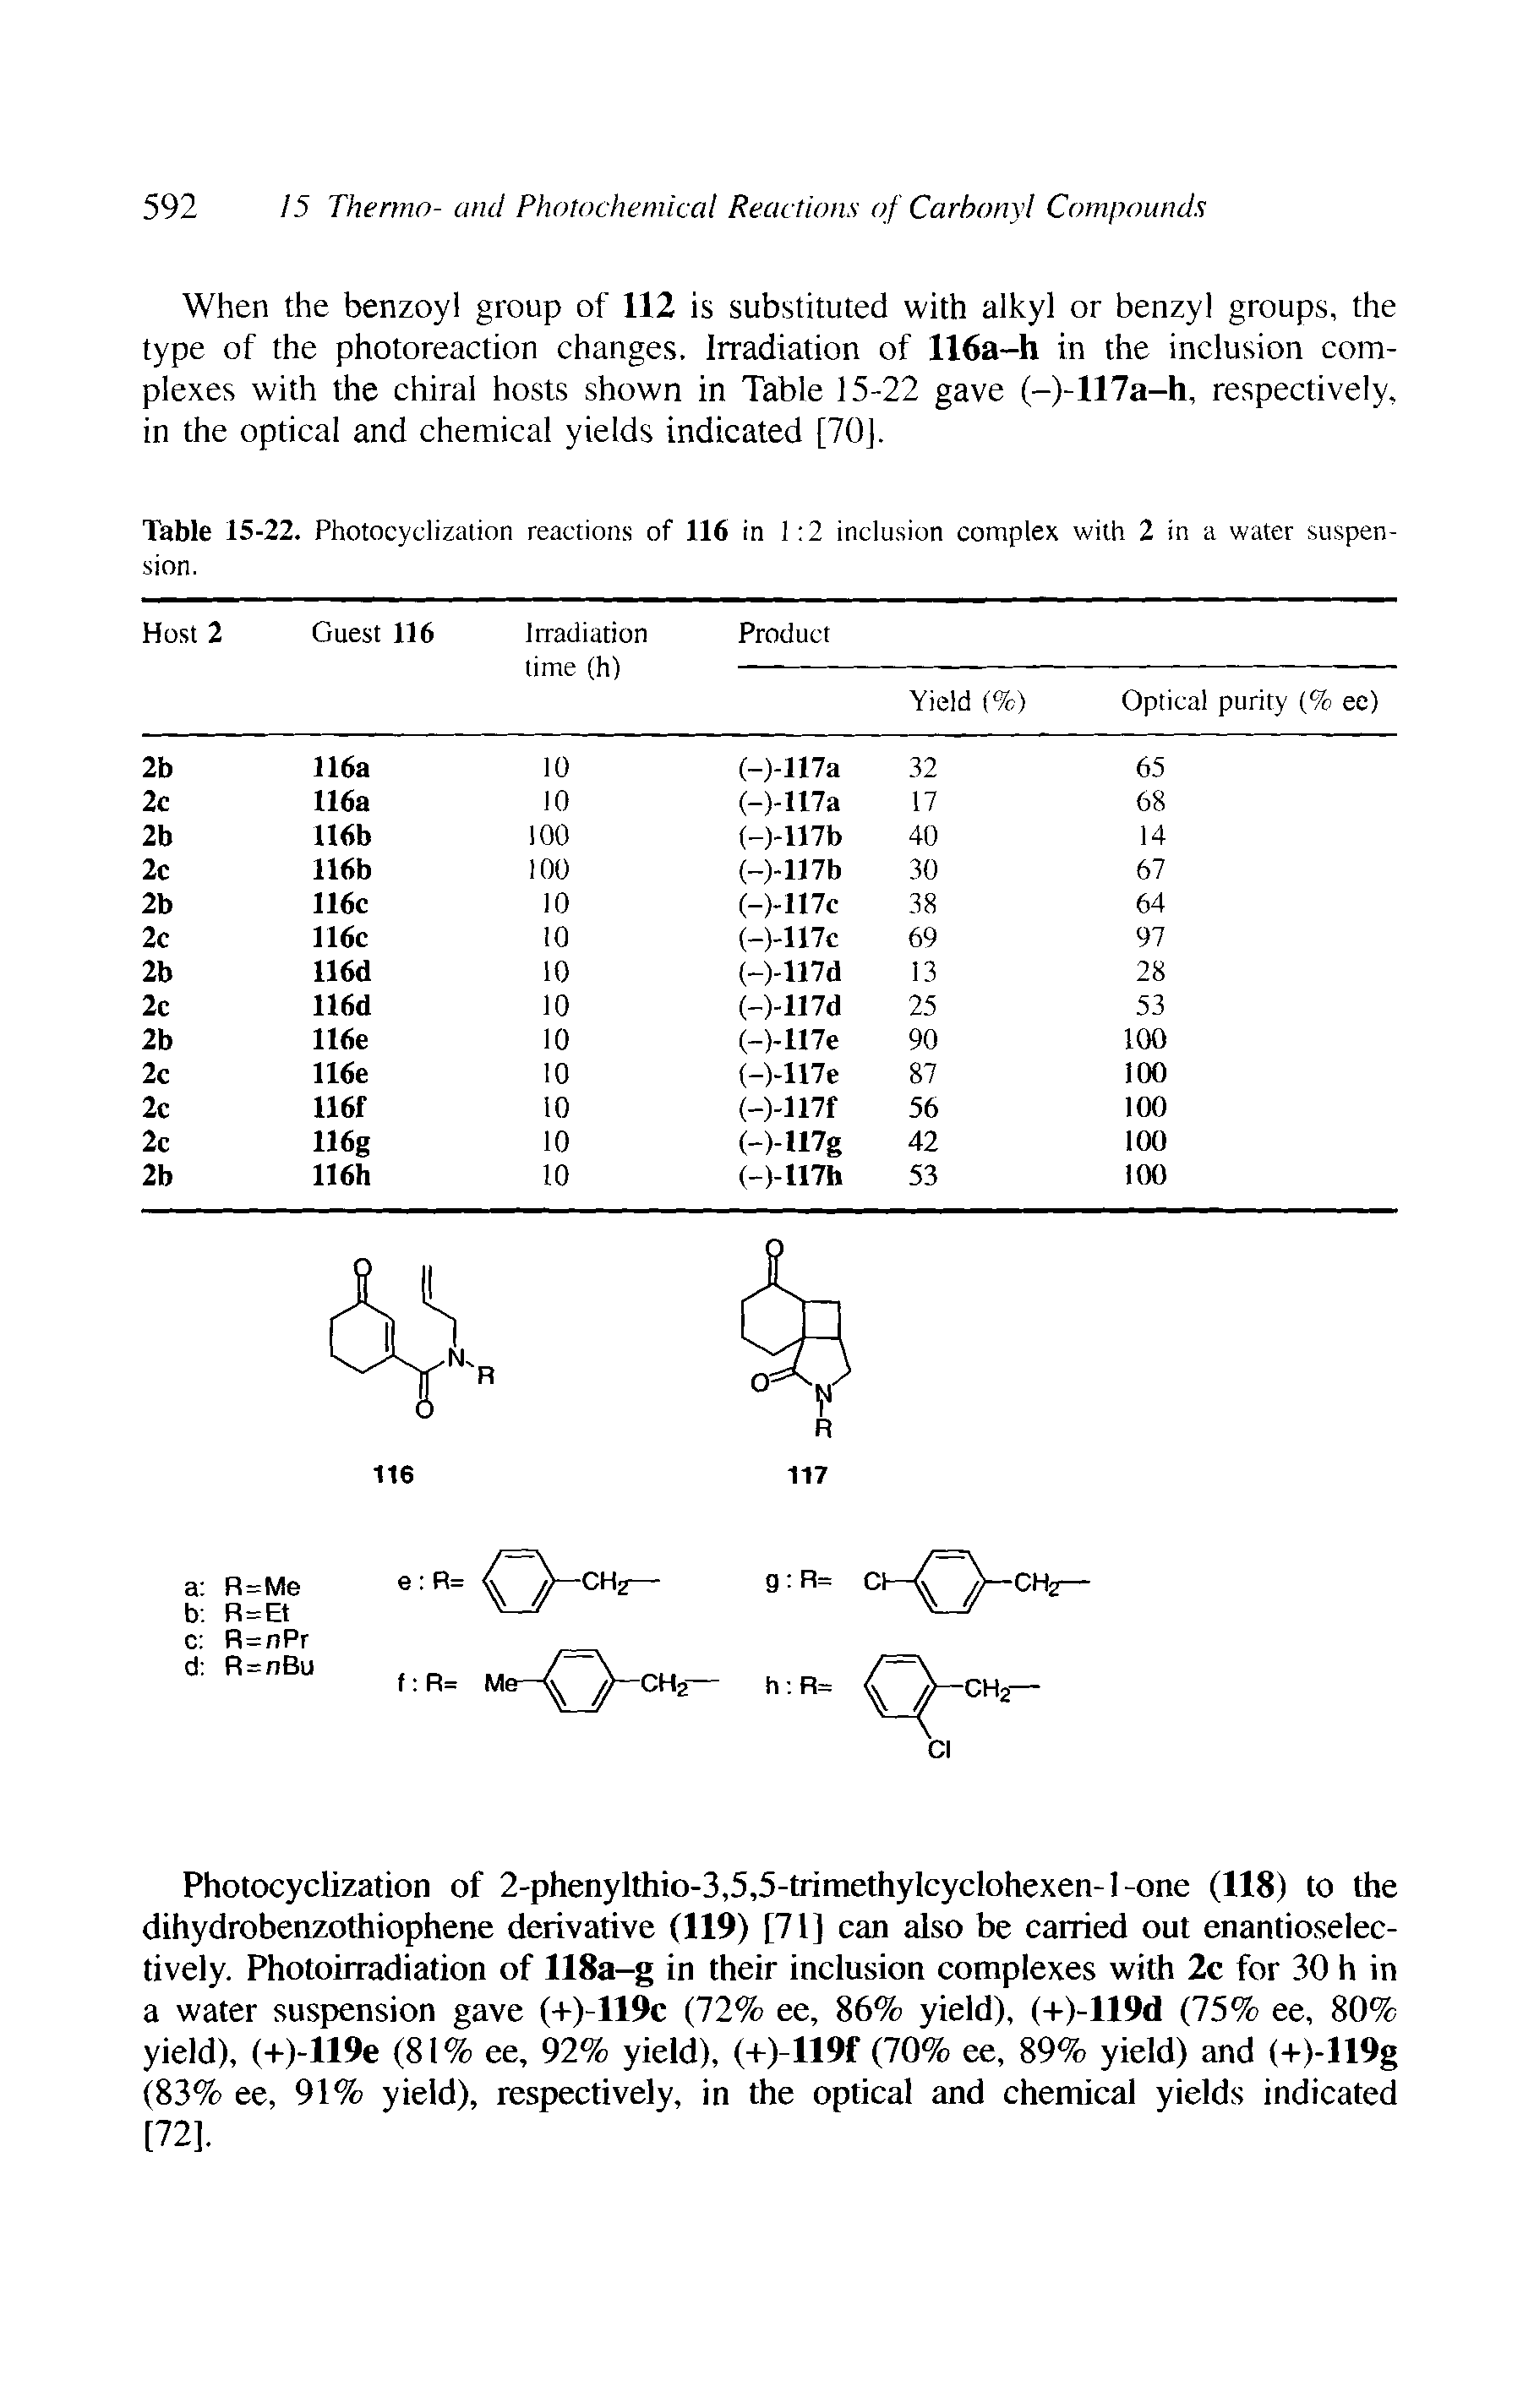 Table 15-22. Photocyclization reactions of 116 in 1 2 inclusion complex with 2 in a water suspension.